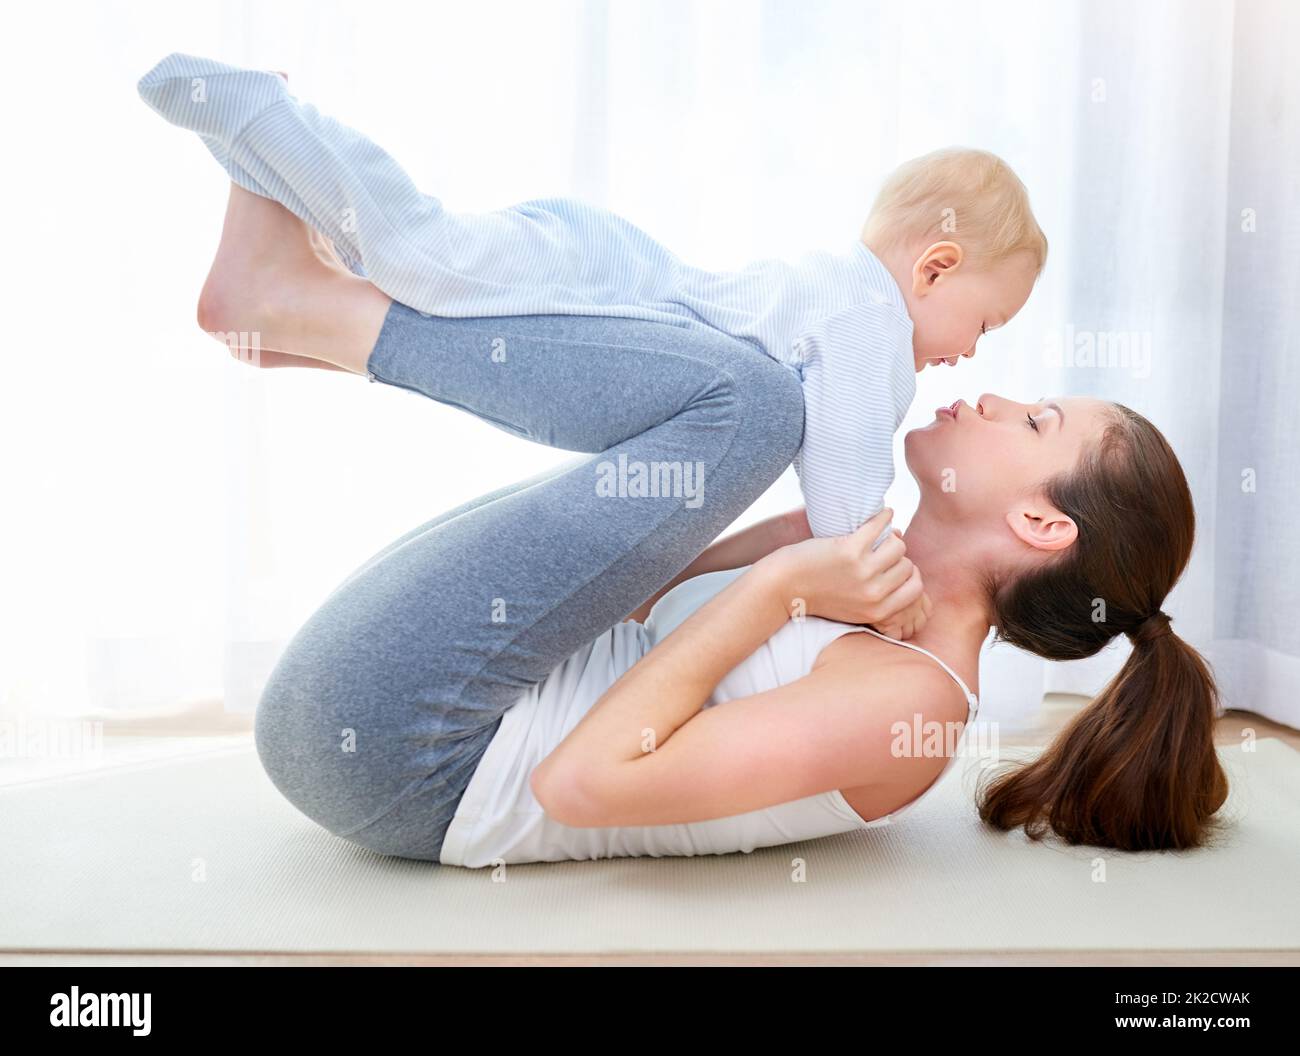 Youre gonna have to work harder for that kiss mom. Shot of a young woman working out while spending time with her baby boy. Stock Photo